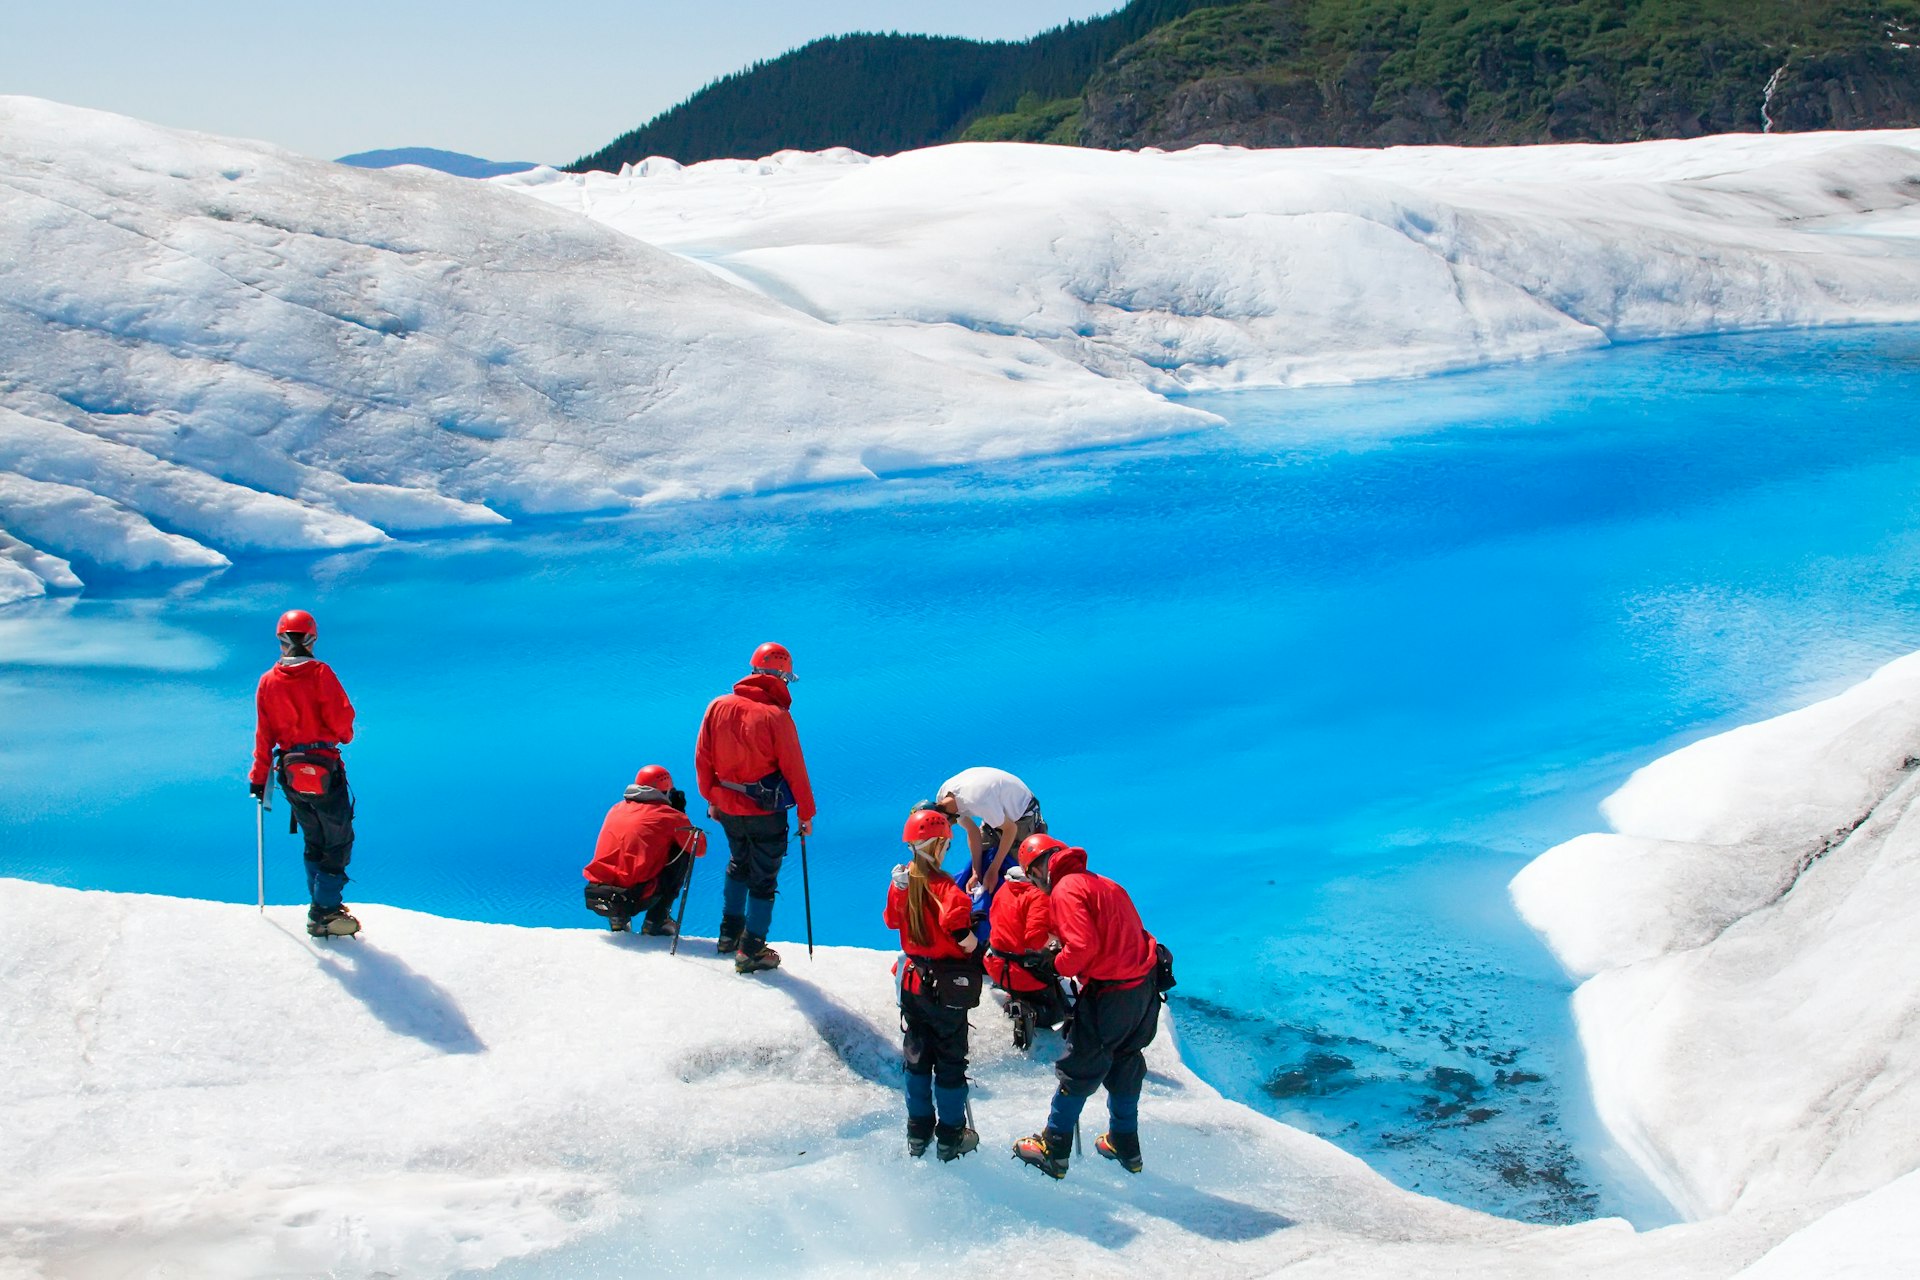 A group of trekkers on a glacier wearing bright red suits gaze down upon a turquoise icy lake